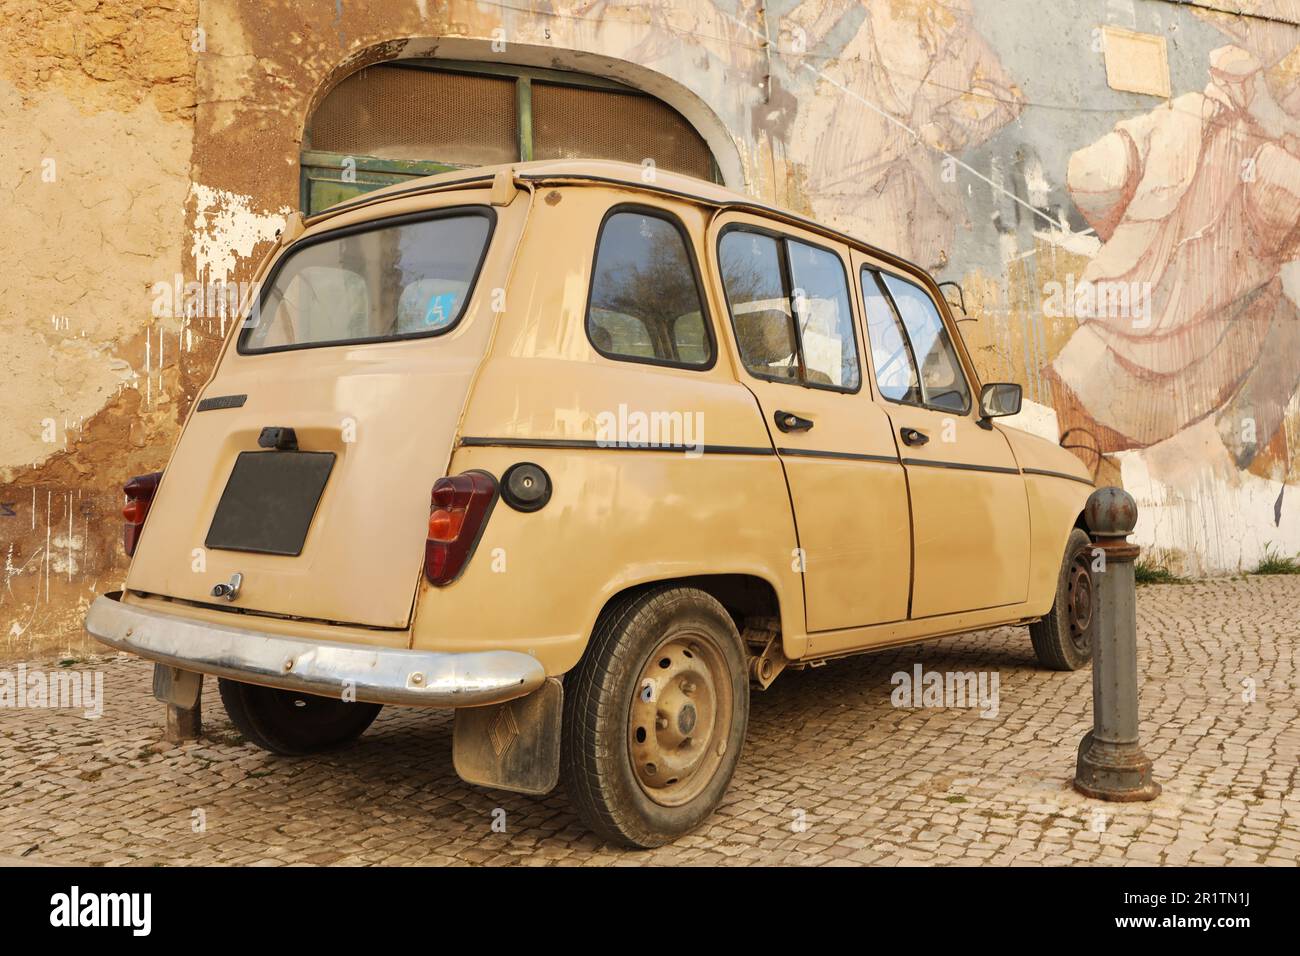 Old Renault car parked in front of a mural, Old Town, Lagos, Algarve, Portugal Stock Photo